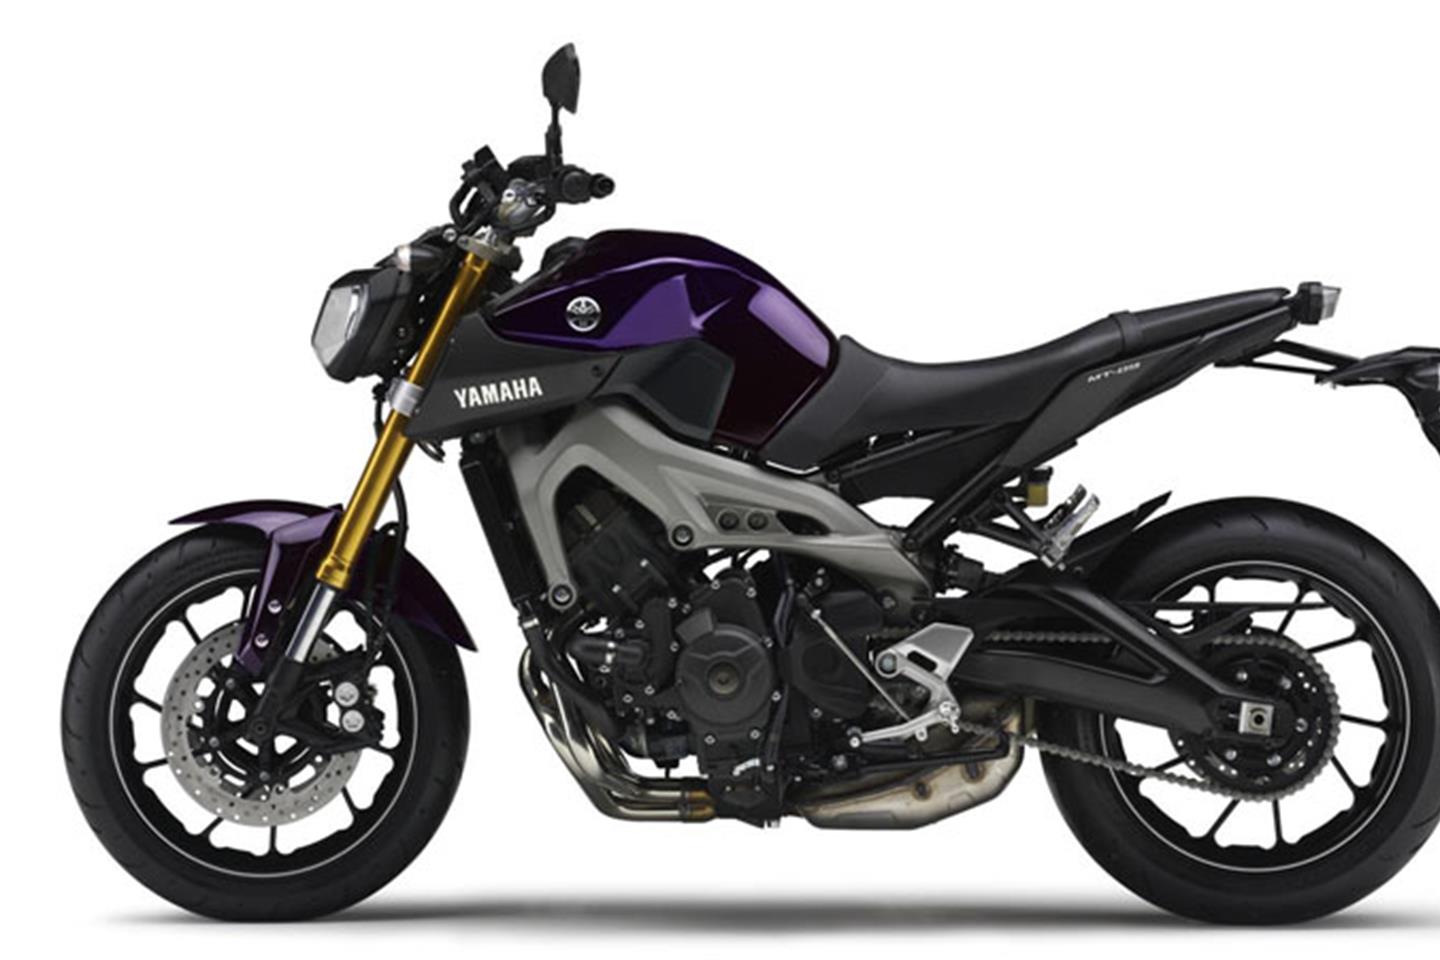 YAMAHA MT-09 (2013-2020) Review | Speed, Specs & Prices